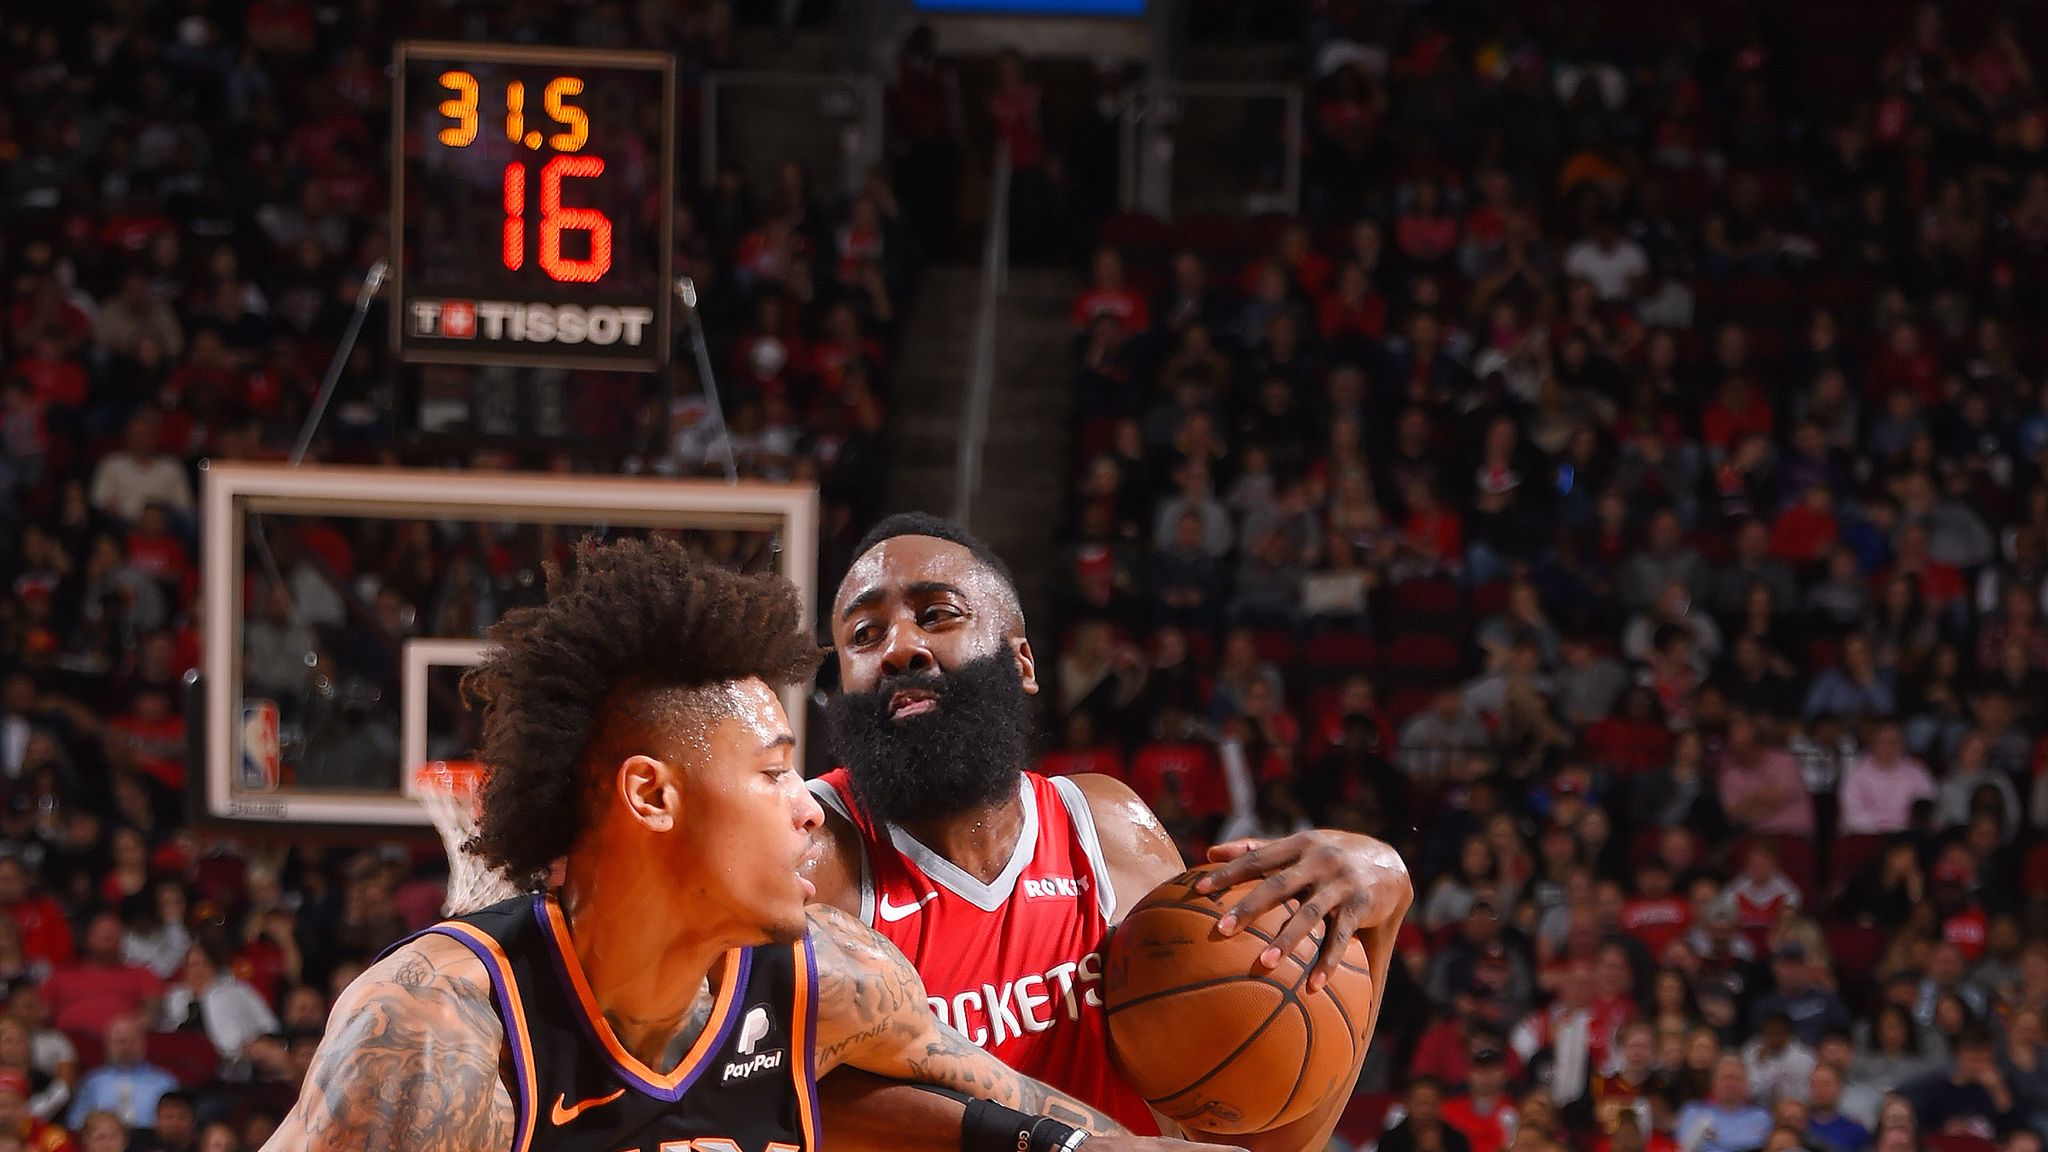 Harden posts 41 points to lead Houston Rockets to win over Phoenix Suns | NBA News | Sky Sports